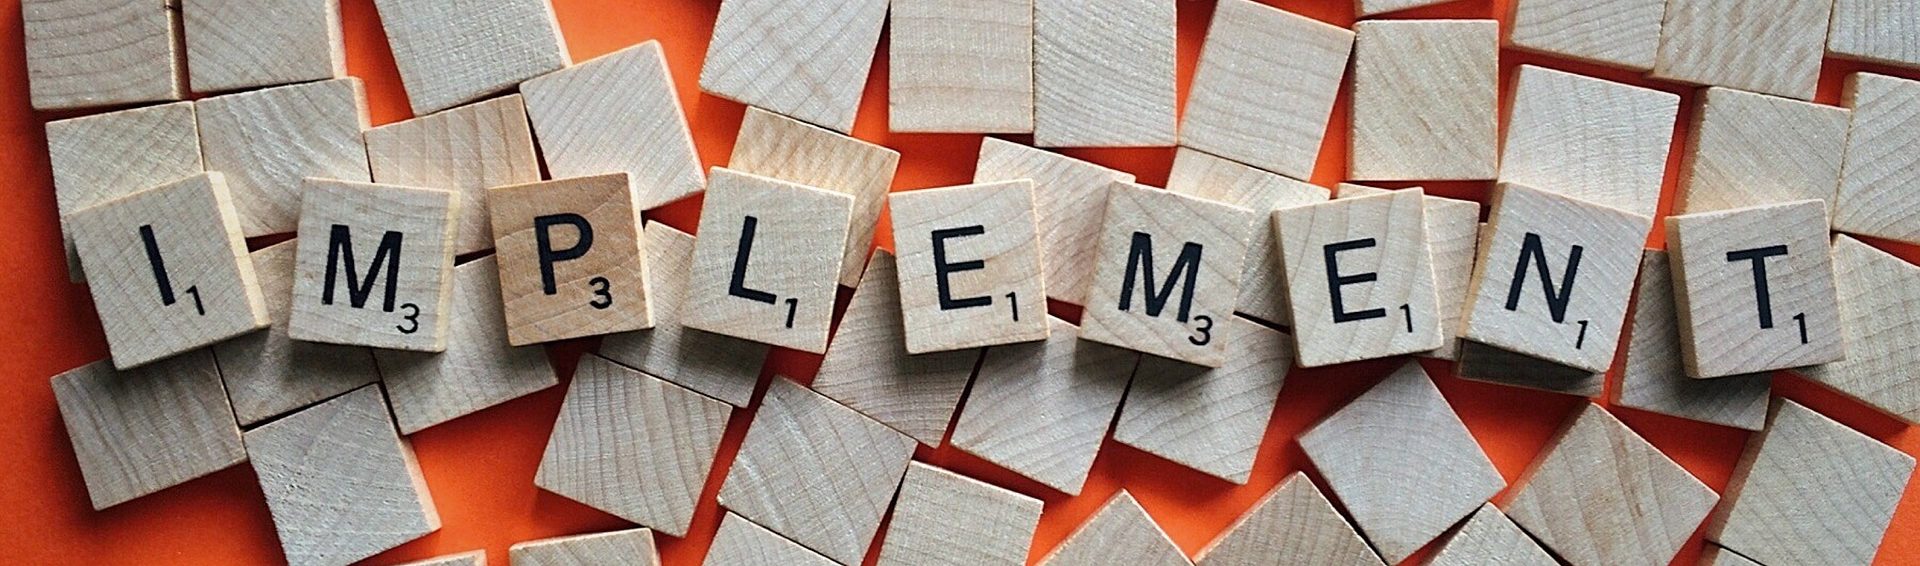 A photograph of scrabble tiles spelling out the word "implement"